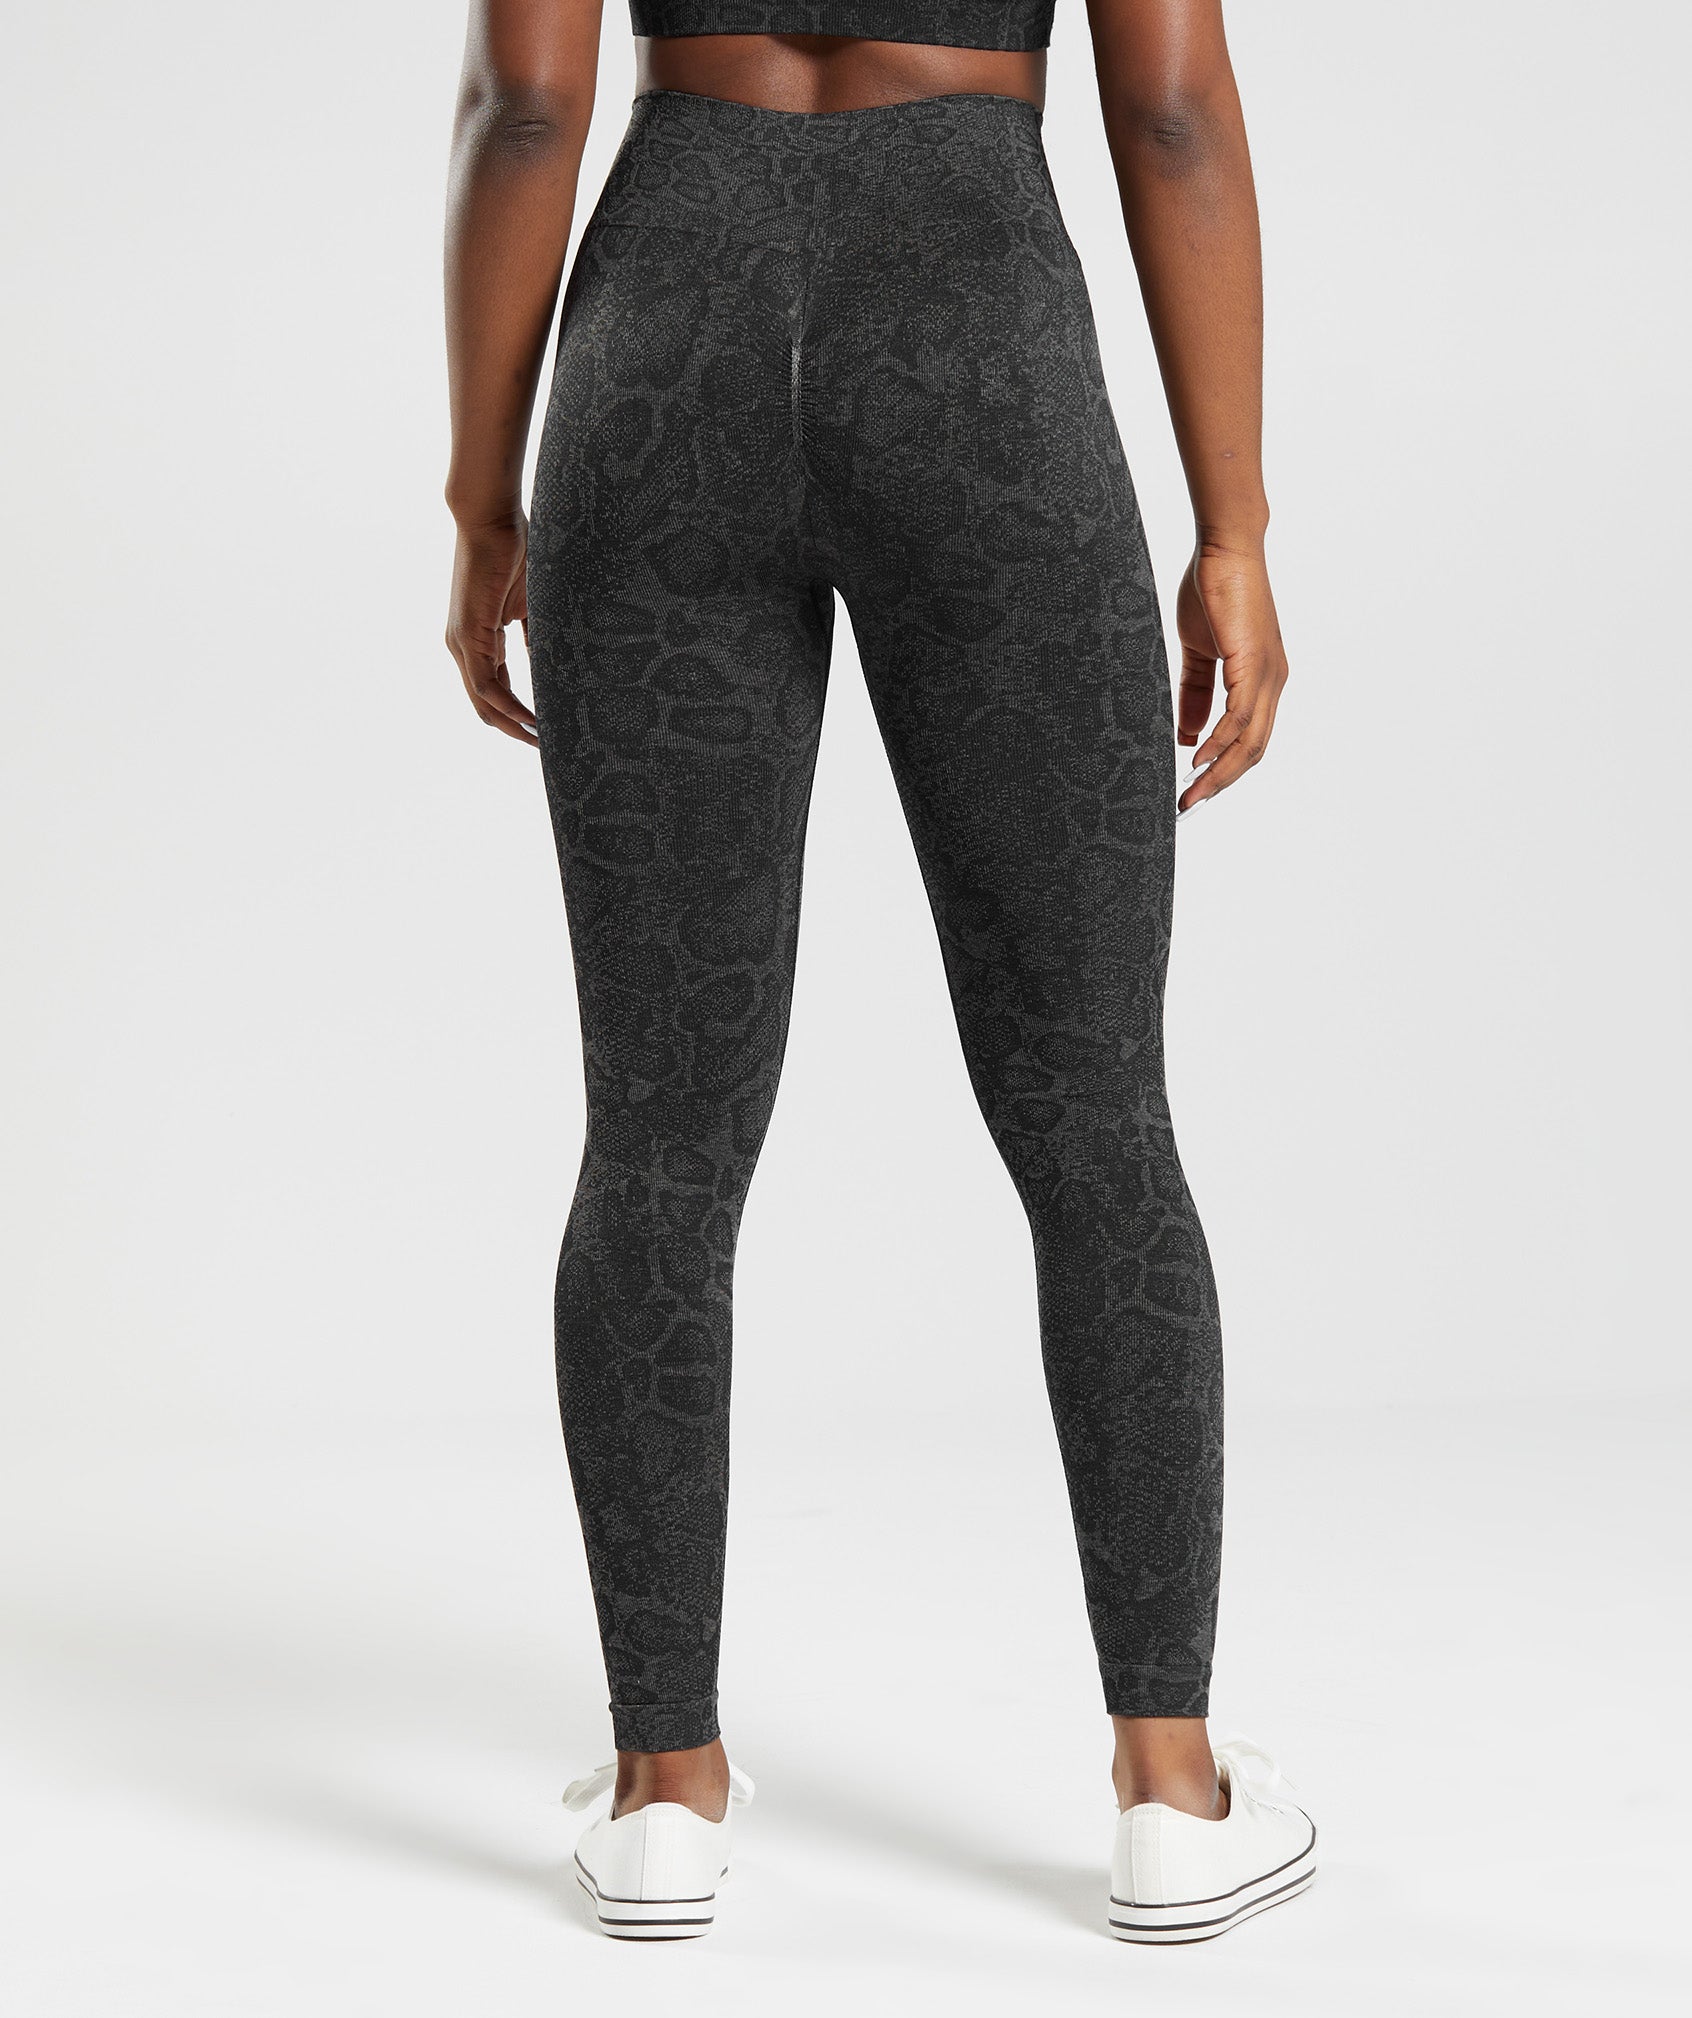 Farmed Animal Athletic Leggings – The Animal Justice Store